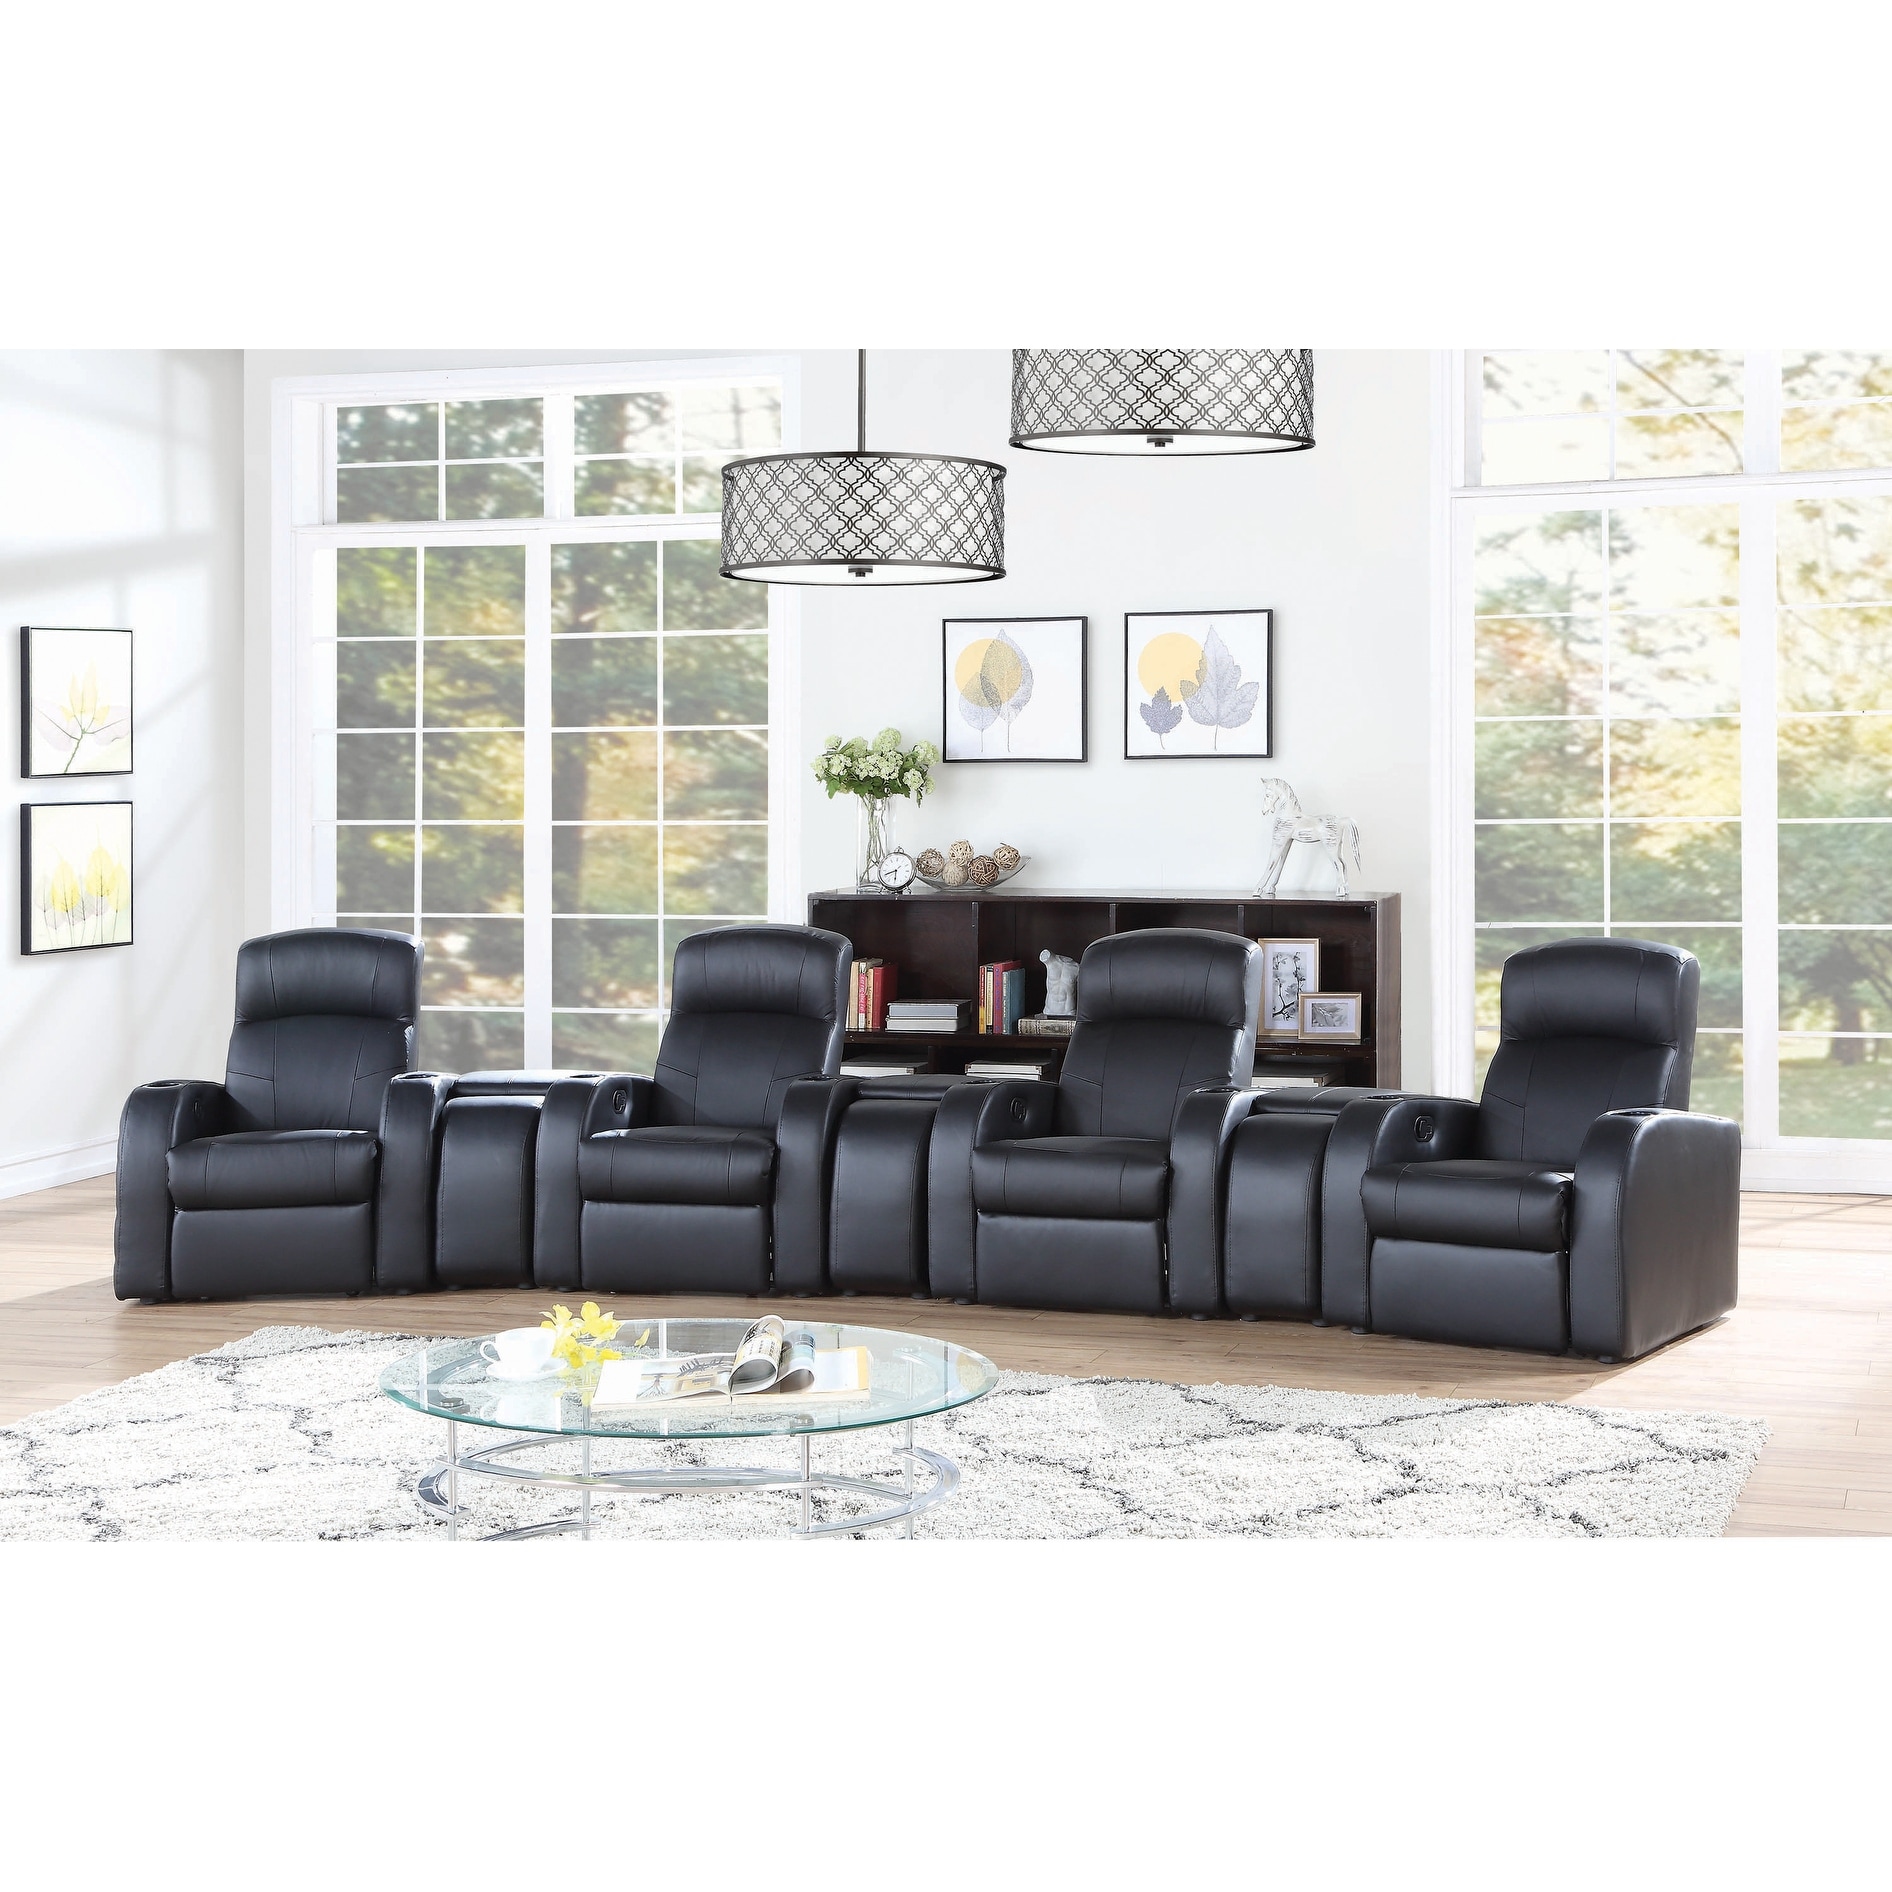 CDecor Greenfield Cyrus Black 4-seater Home Theater with 3 Wedge Consoles